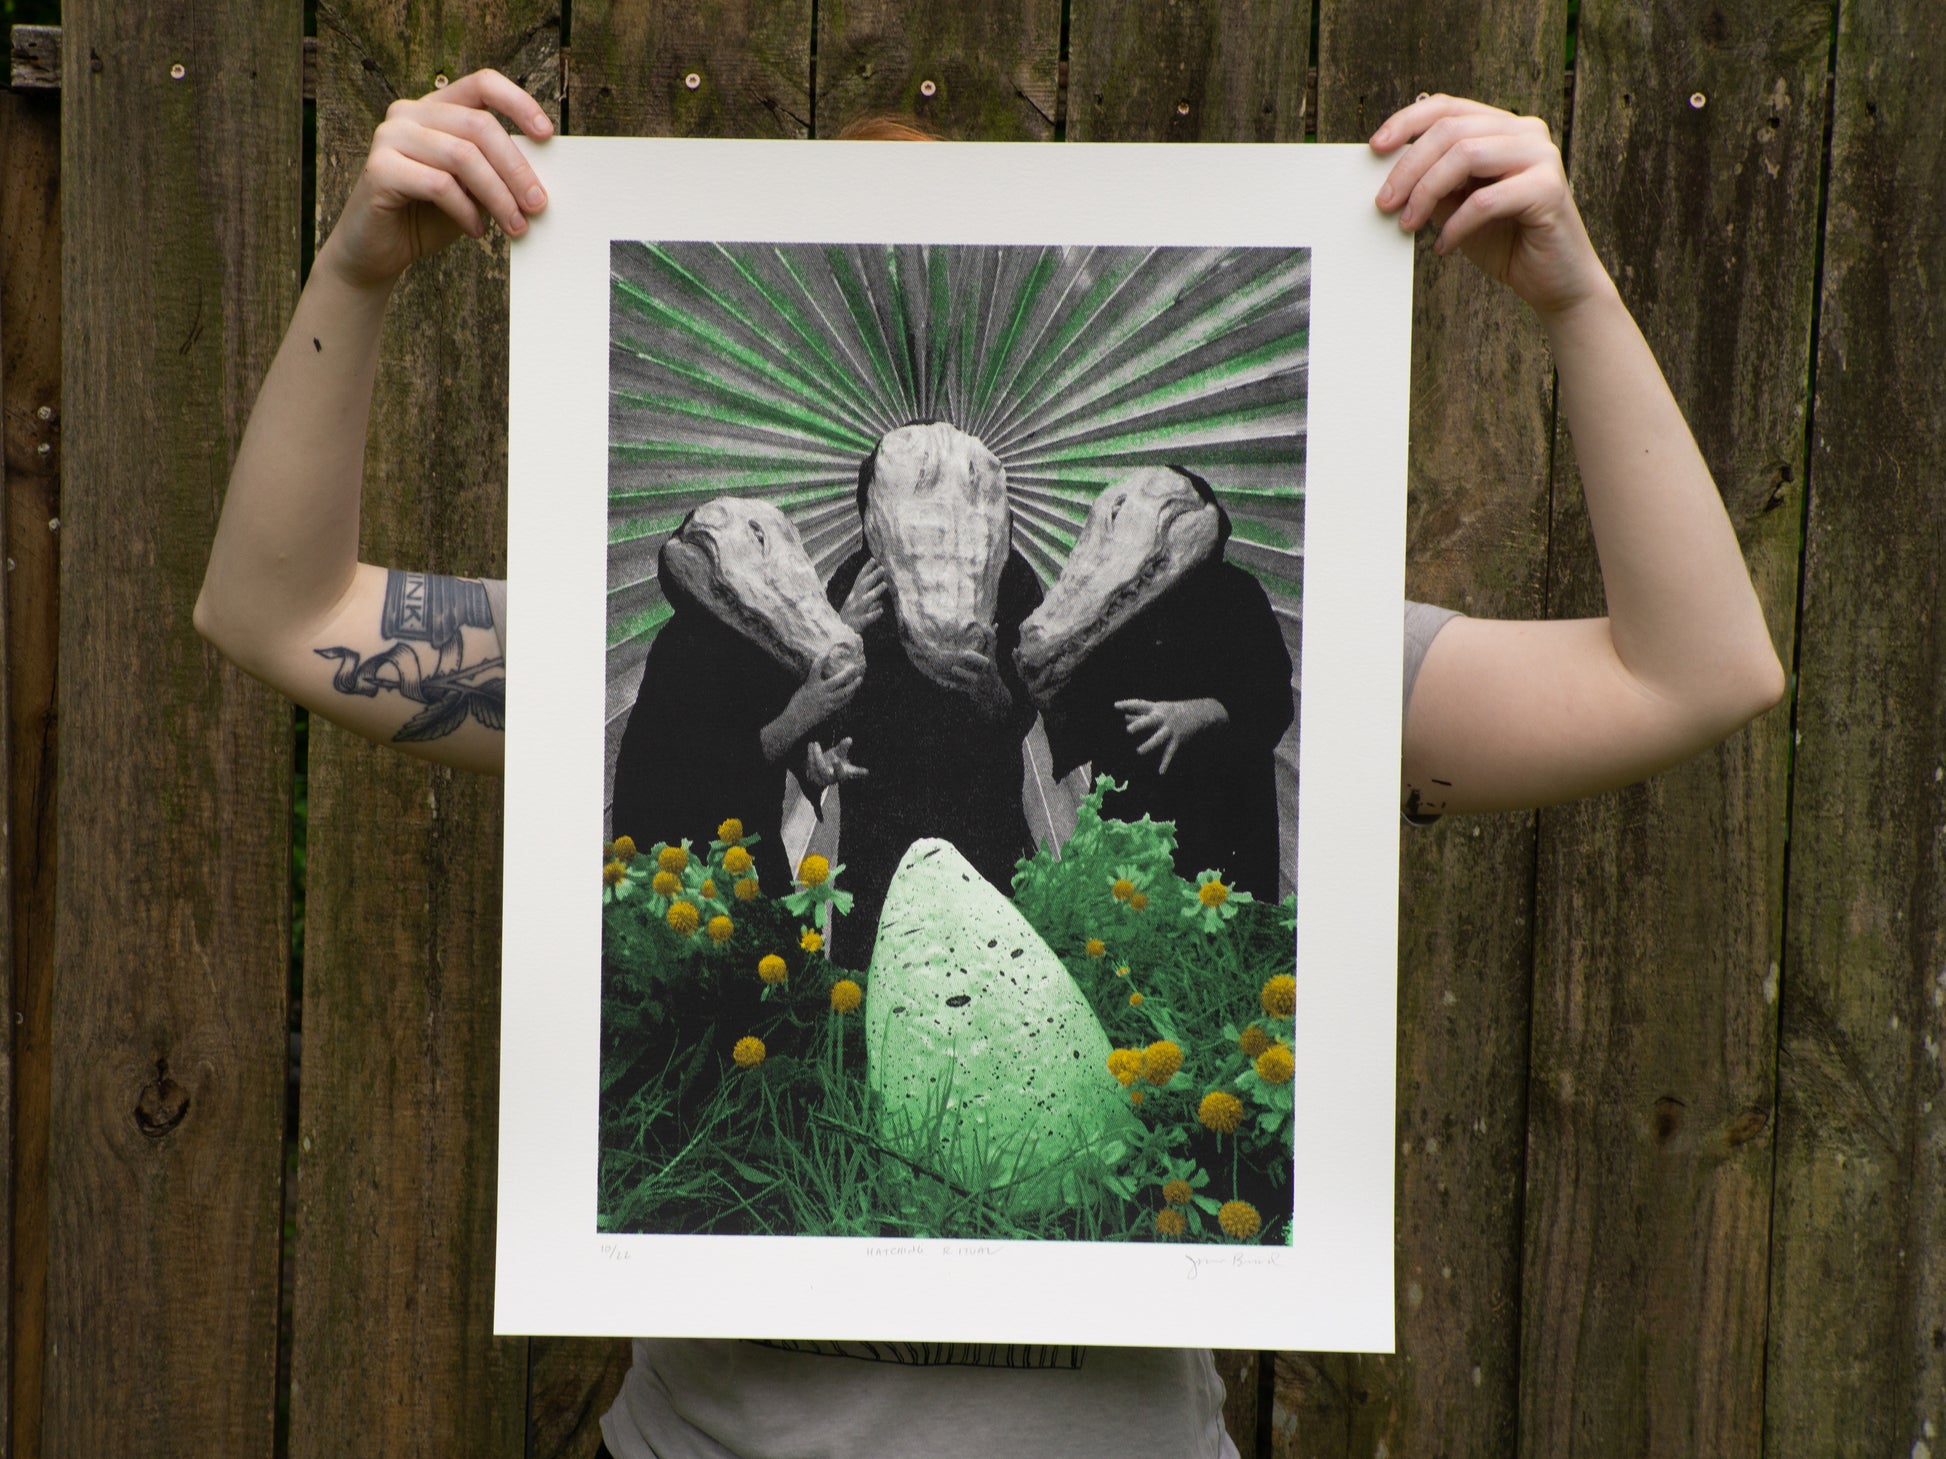 18x24 screenprint with three alligator humanoids standing over an egg. The print is held by a person for scale.